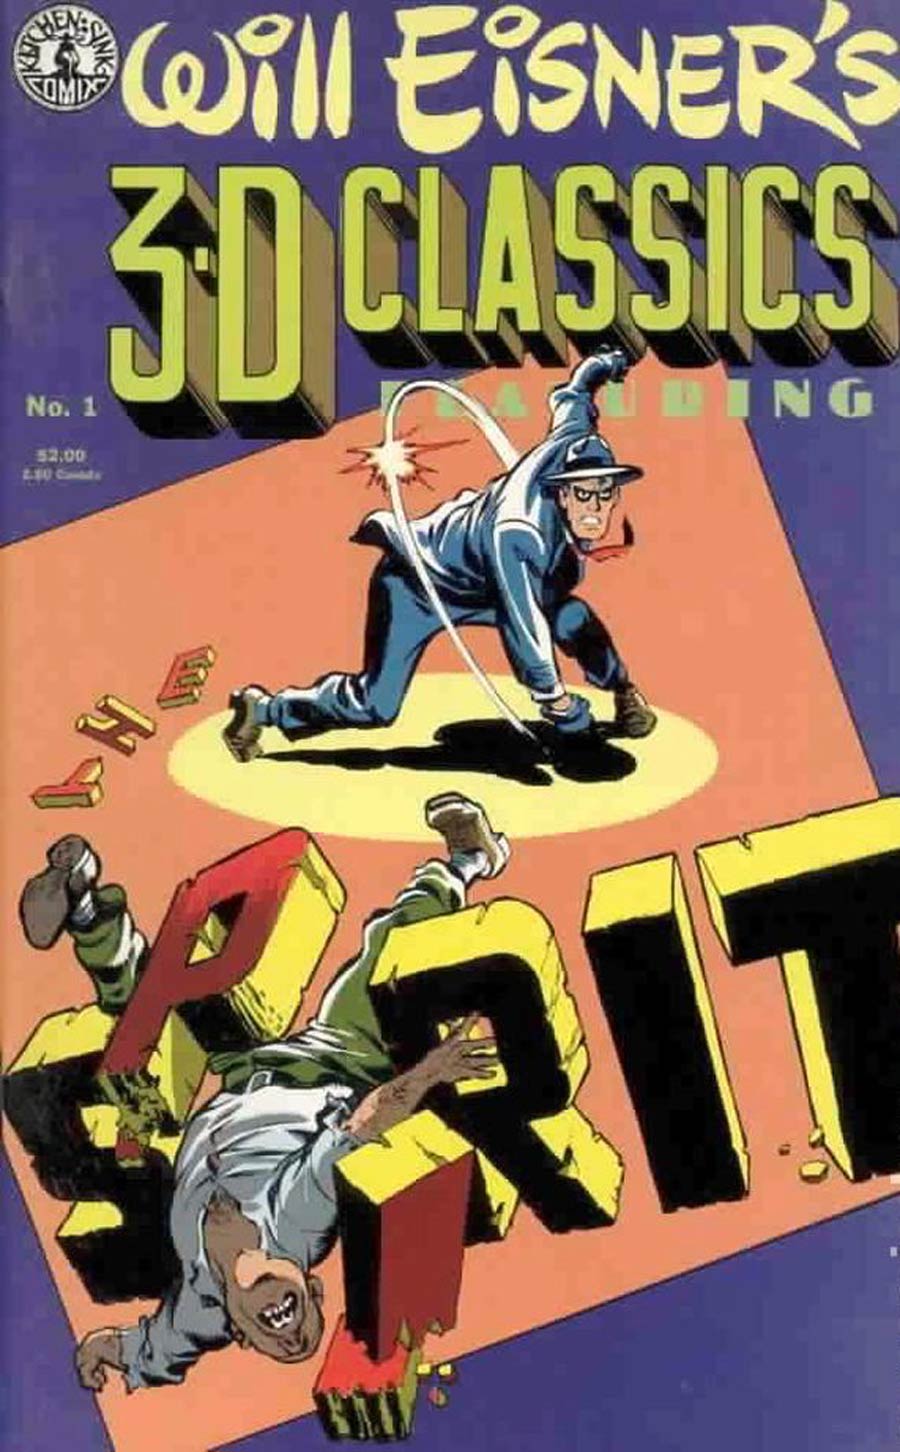 Will Eisners 3-D Classics Featuring The Spirit #1 Cover A With Glasses